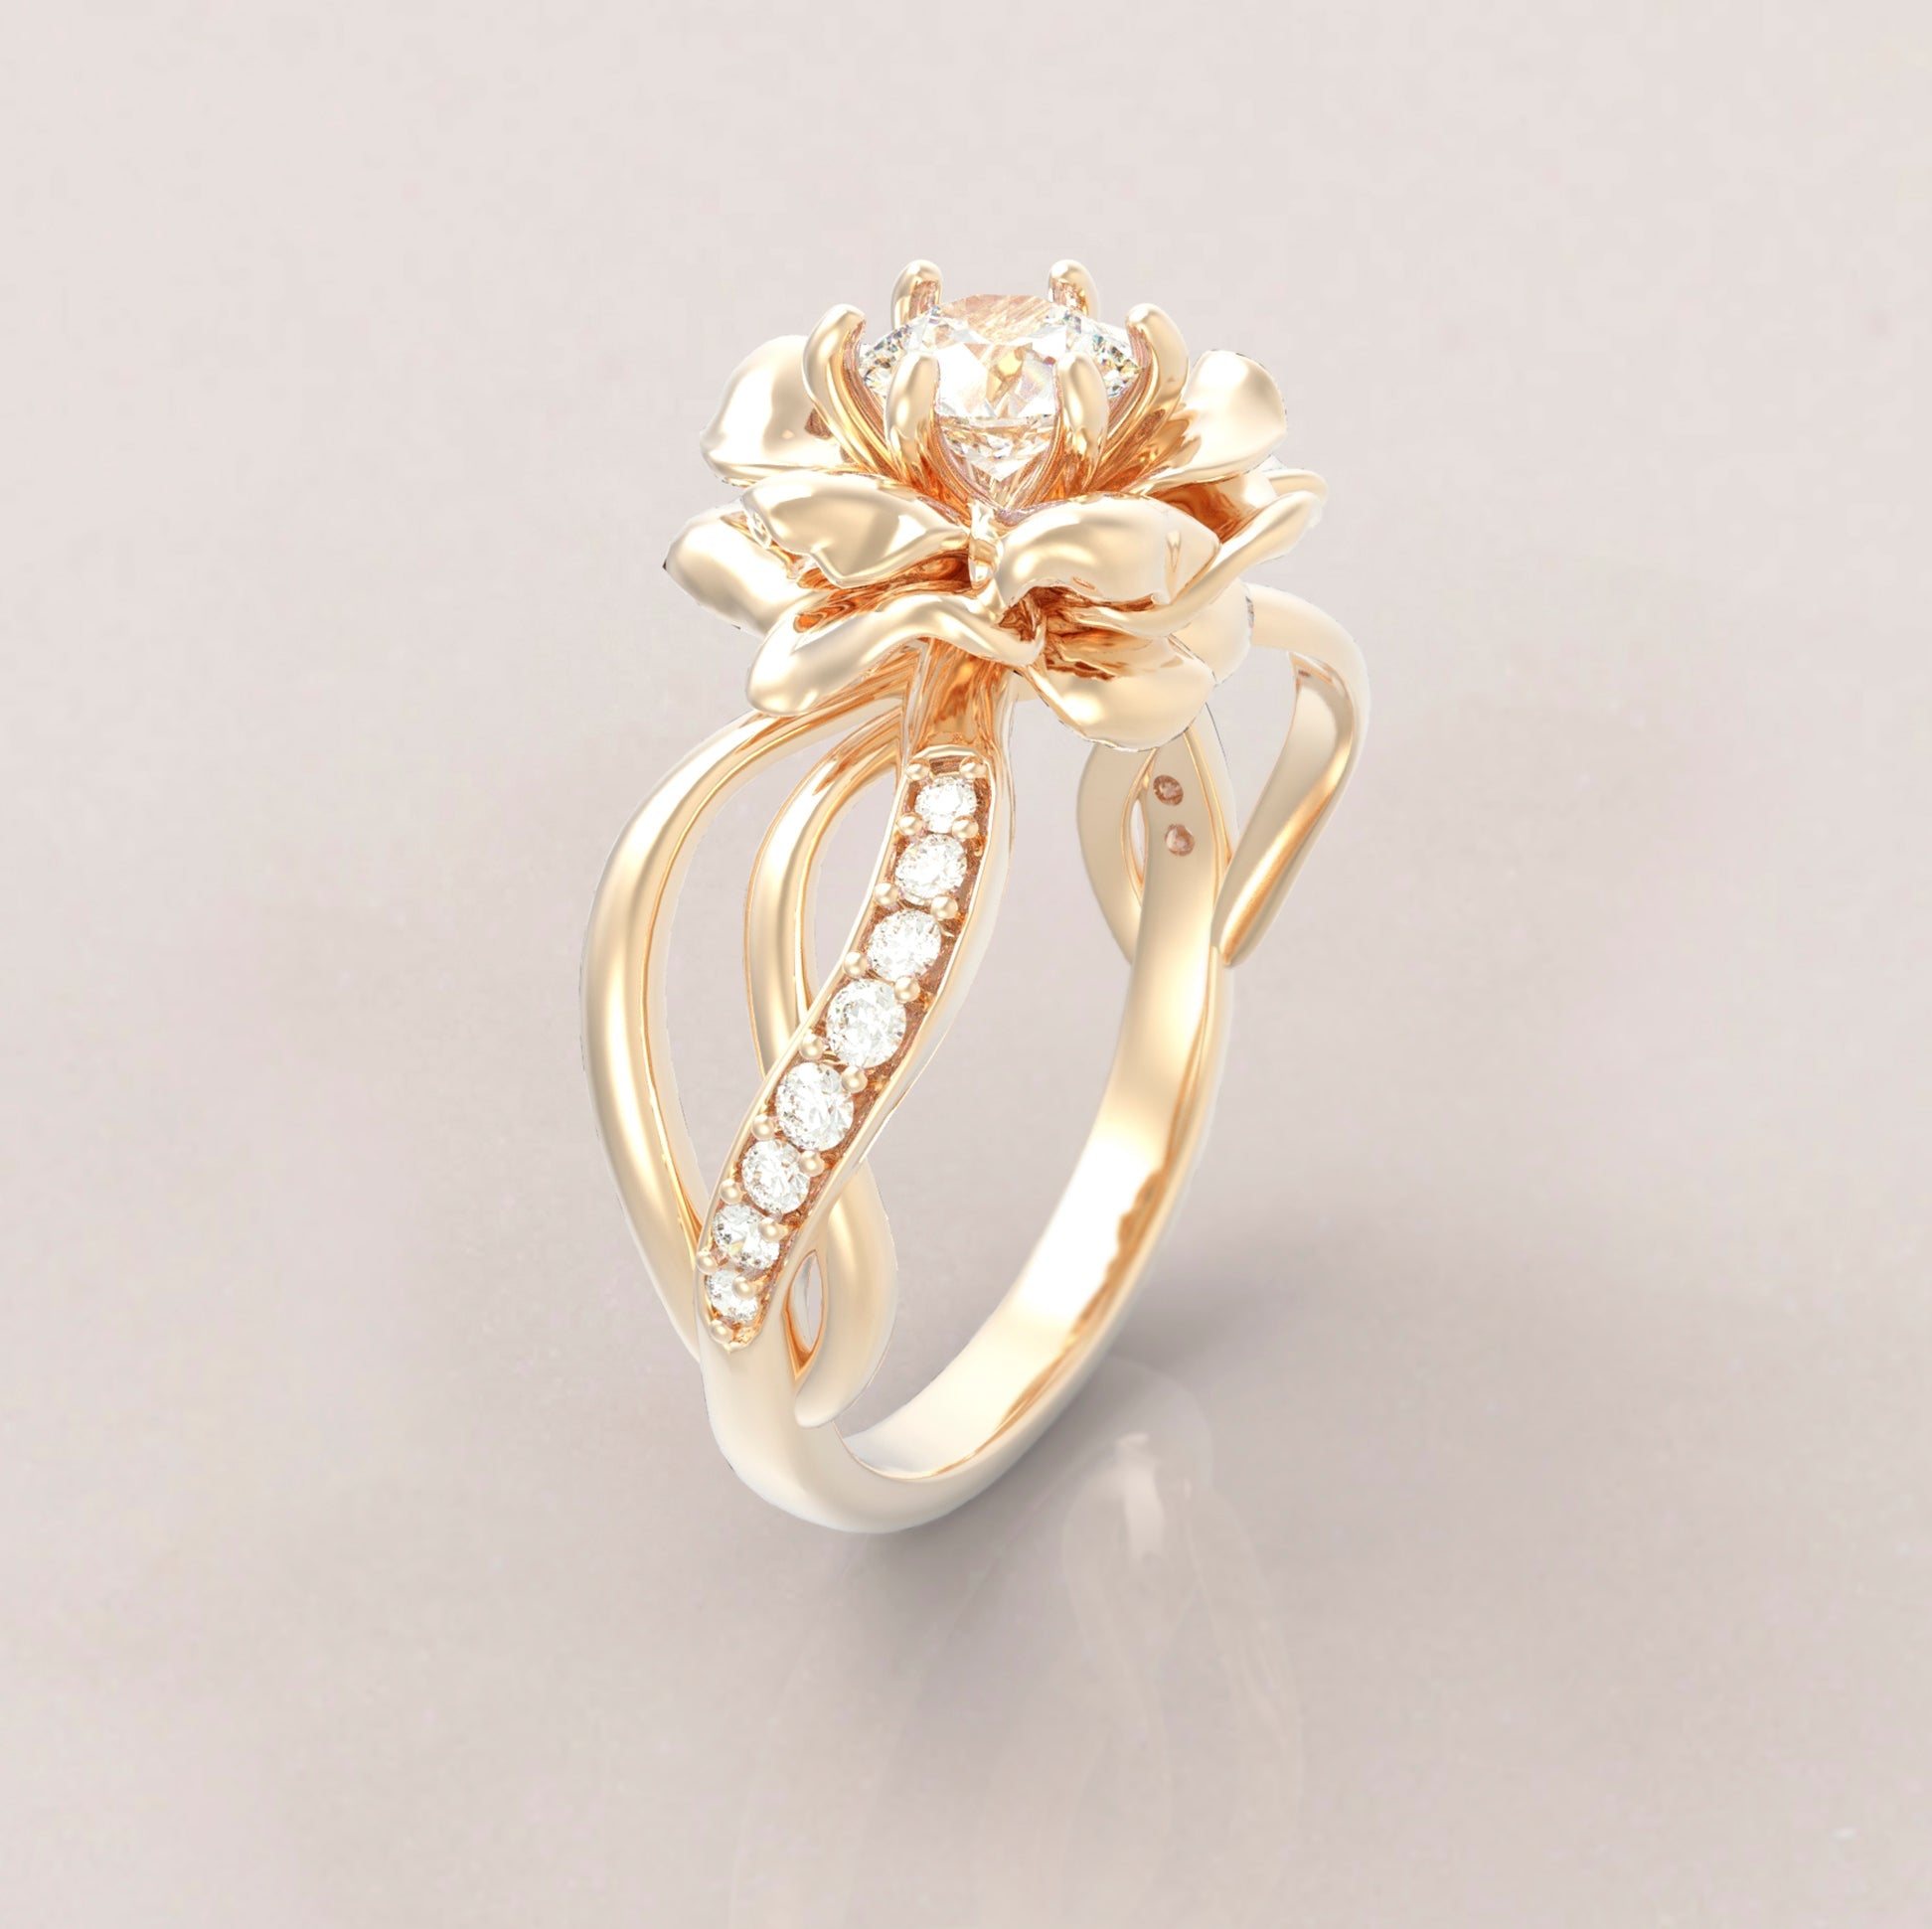 unique rose engagement ring no67 in yellow gold moissanitediamond 194953